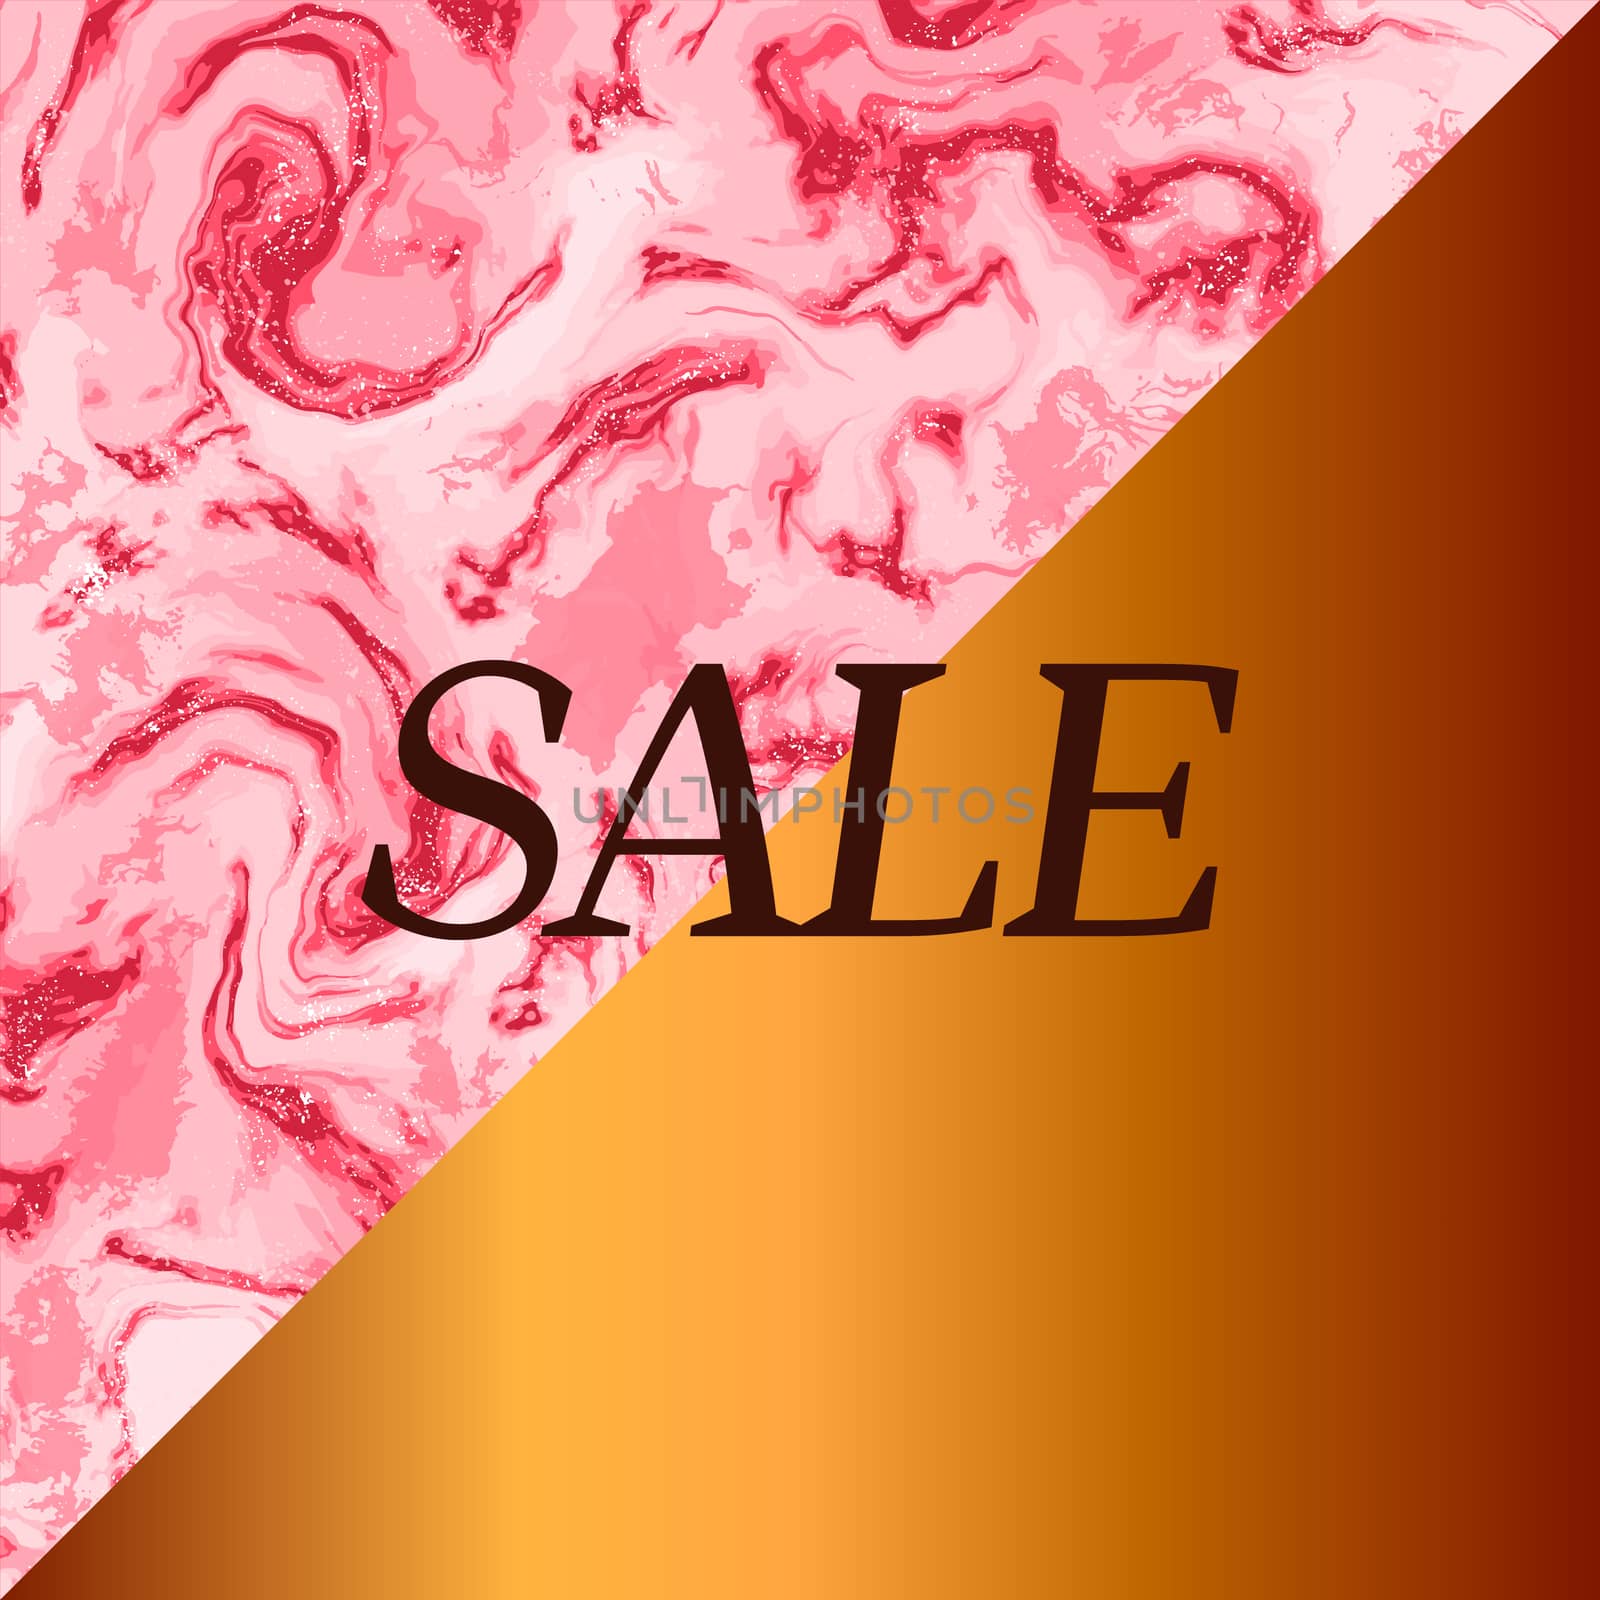 Lush Lava Abstract trendy background. Marble effect painting with note sale. Mixed colour paints. For wallpaper, business cards, poster, flyer, banner, invitation, website, print. Vector Illustration.